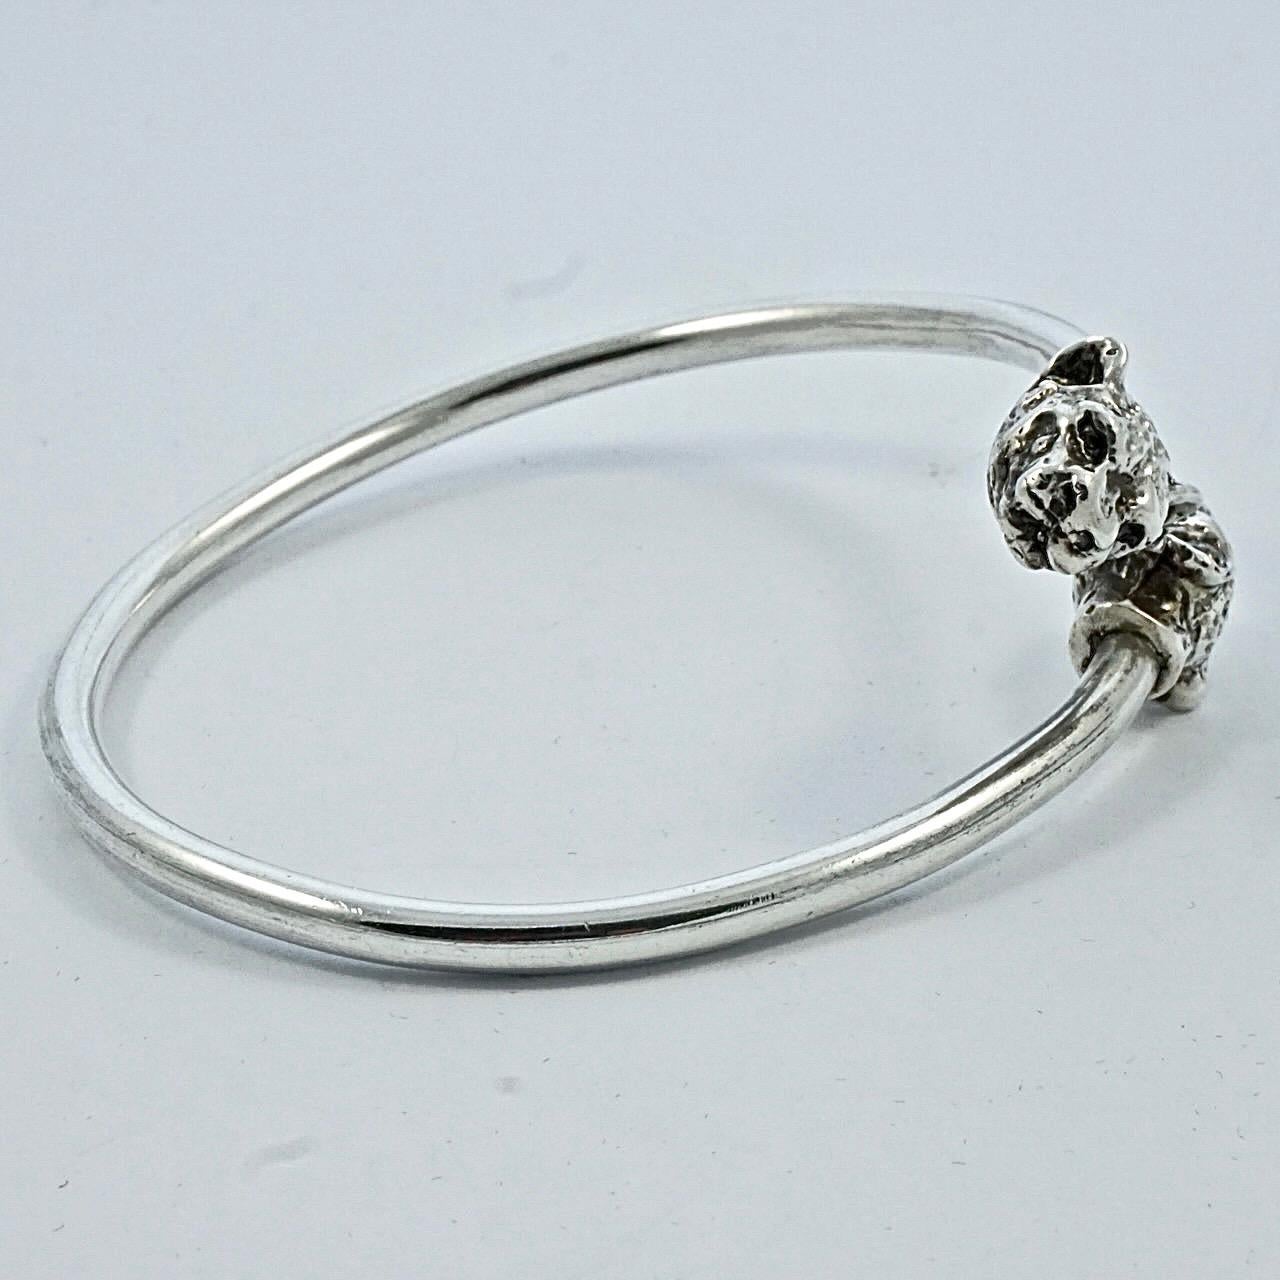 Heavy Silver Leopard Heads Bangle Bracelet In Good Condition For Sale In London, GB